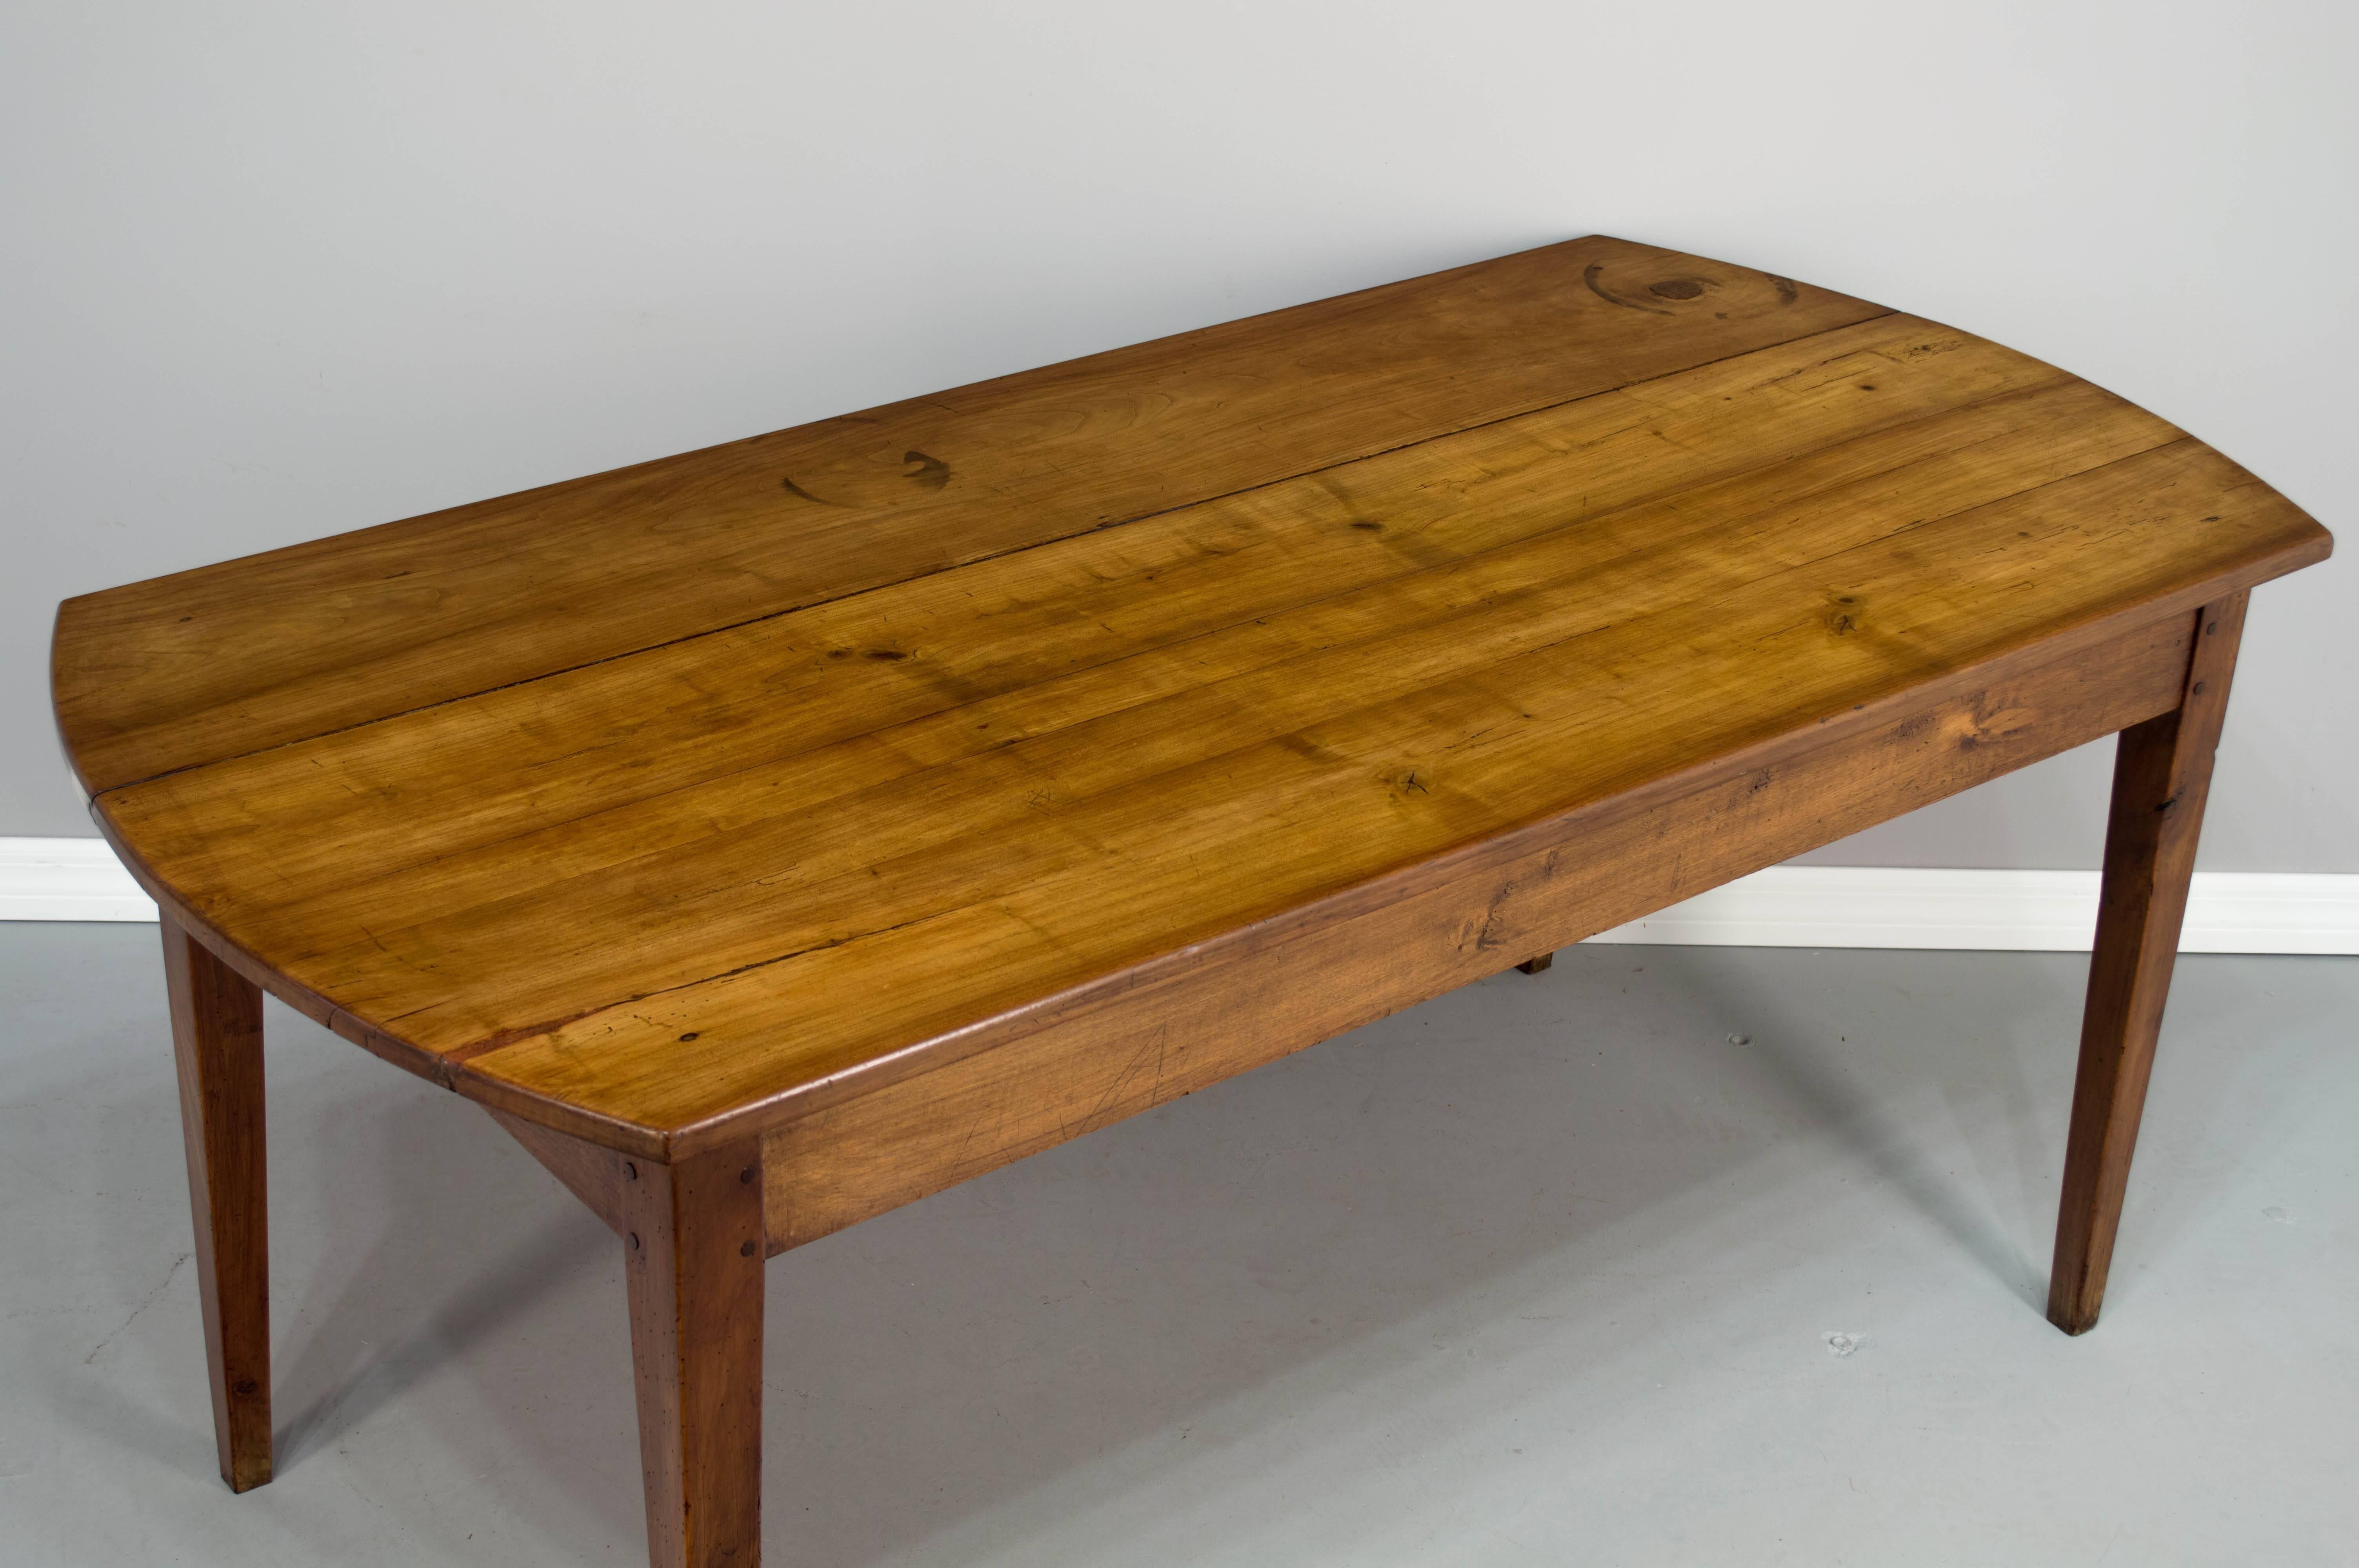 French country farm table from Normandy, c.1900-1920. Made of cherry with tapered legs and pegged construction. 64.5